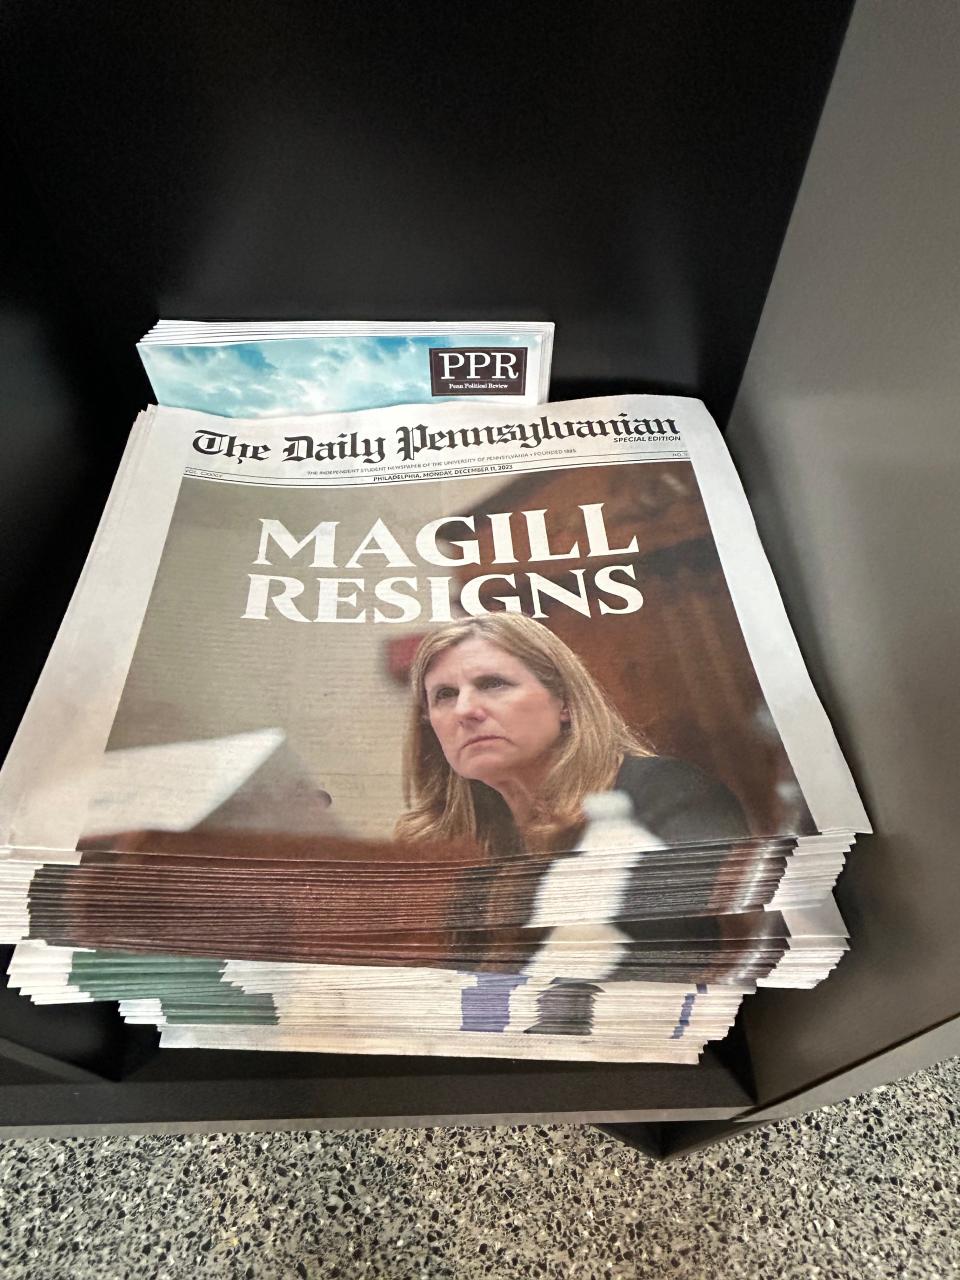 A special edition of the Daily Pennsylvanian, the University of Penn's student newspaper, reports on the resignation of president Liz Magill.